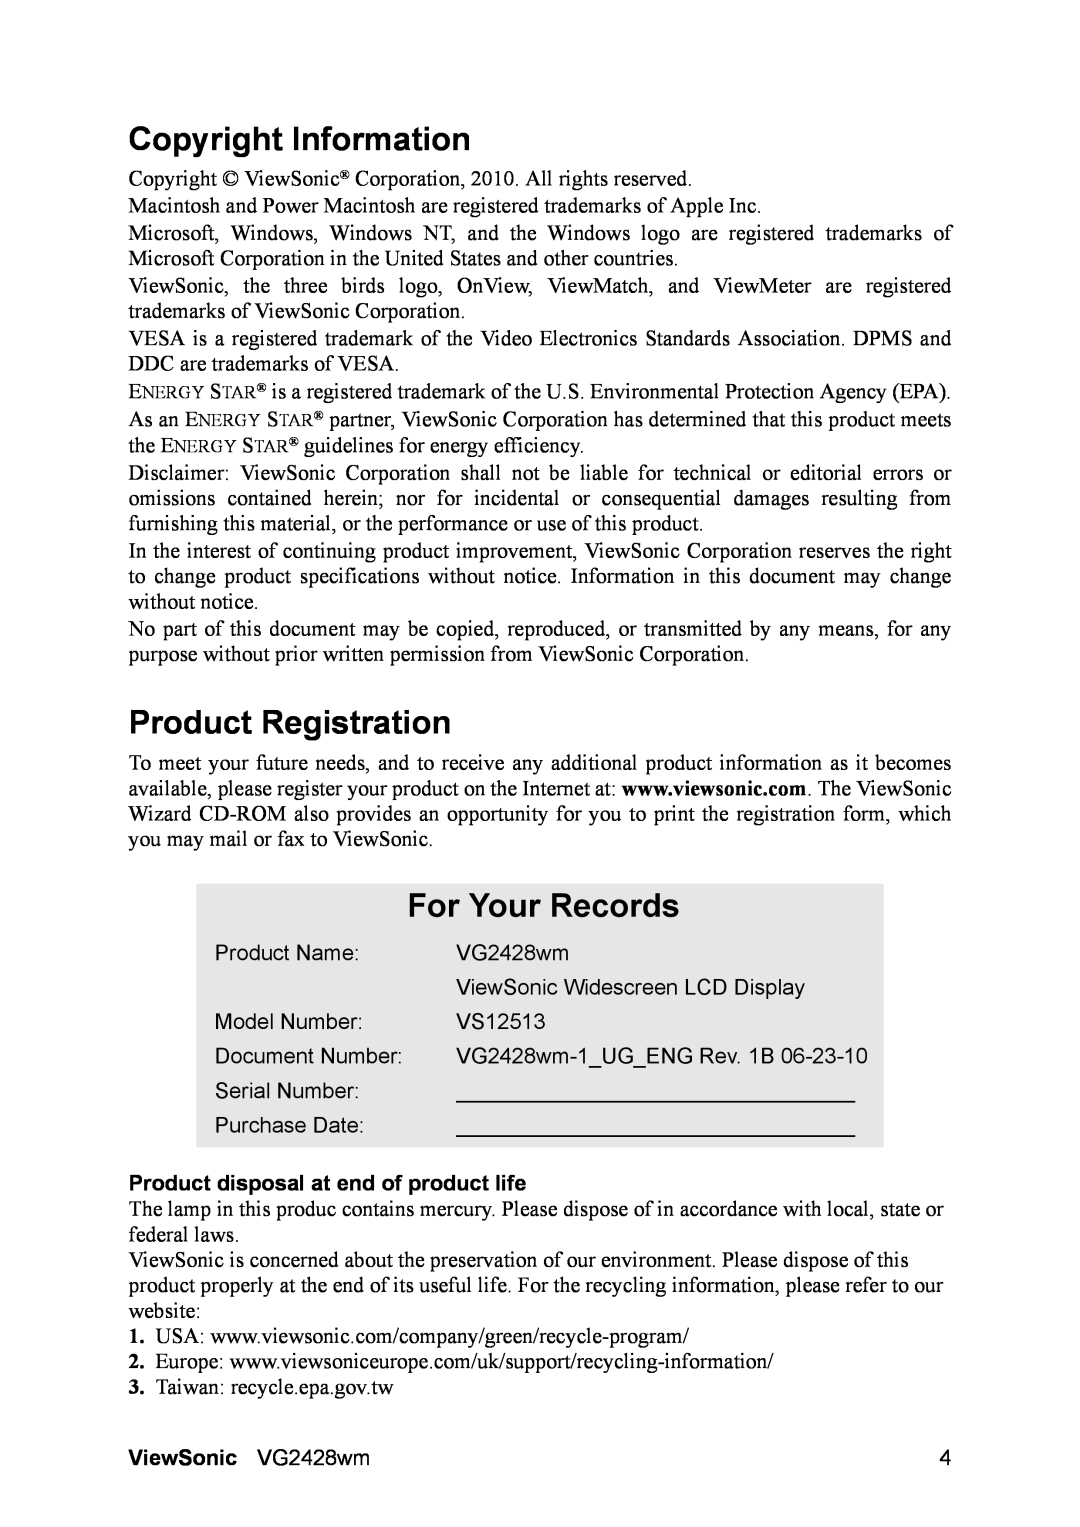 ViewSonic VS12513 Copyright Information, Product Registration, For Your Records, Product disposal at end of product life 